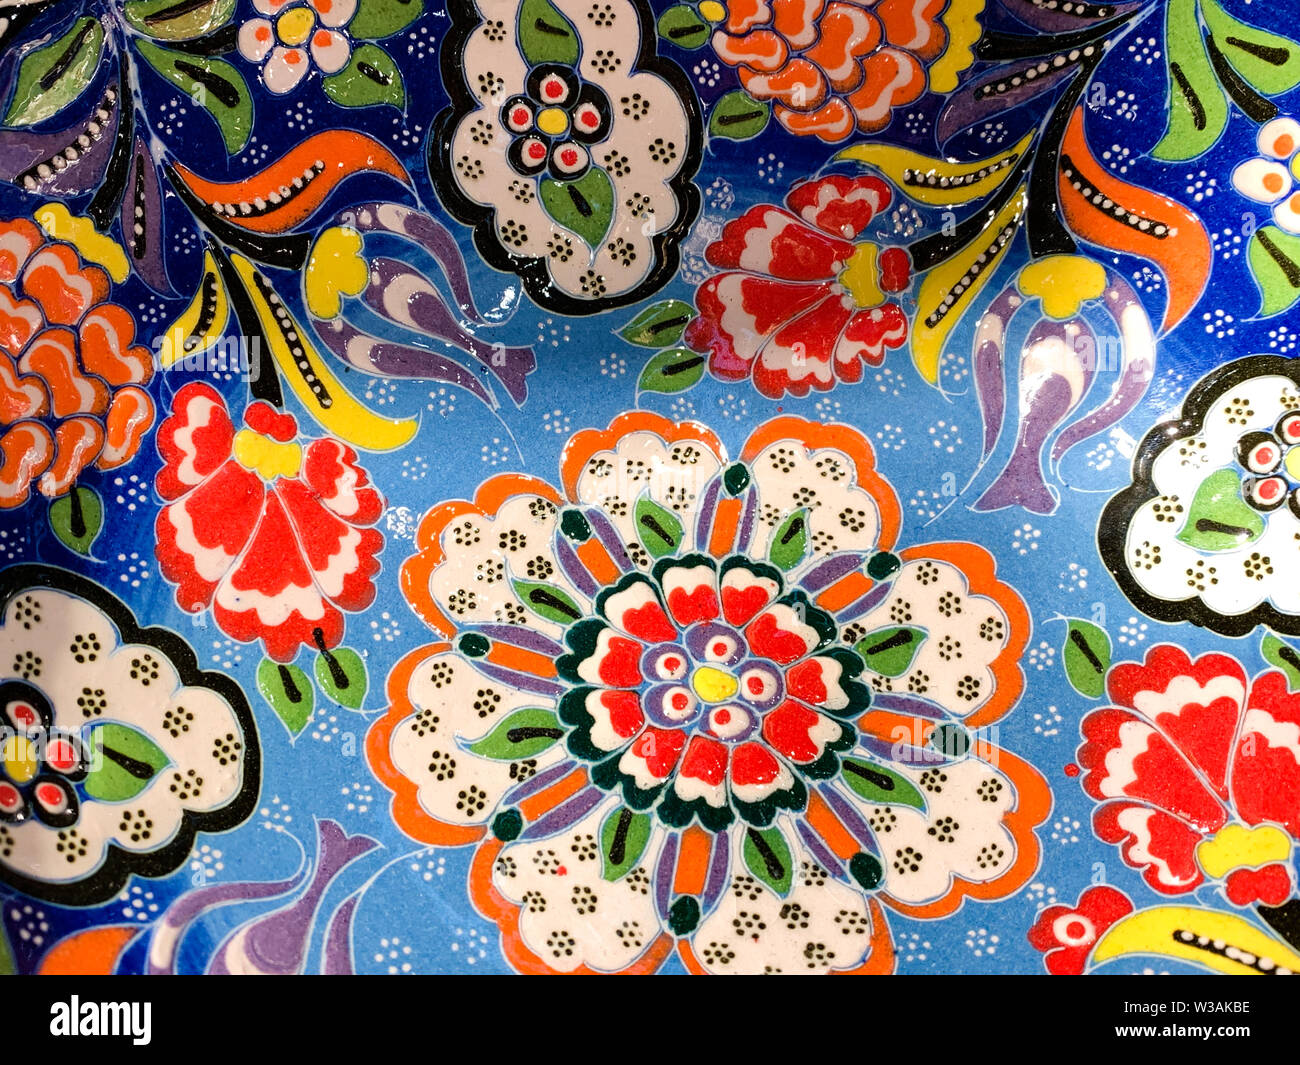 Typical ethnic porcelain bowls on sales with floral and ornamentic pattern. Traditional styled souvenir from Turkey. Stock Photo